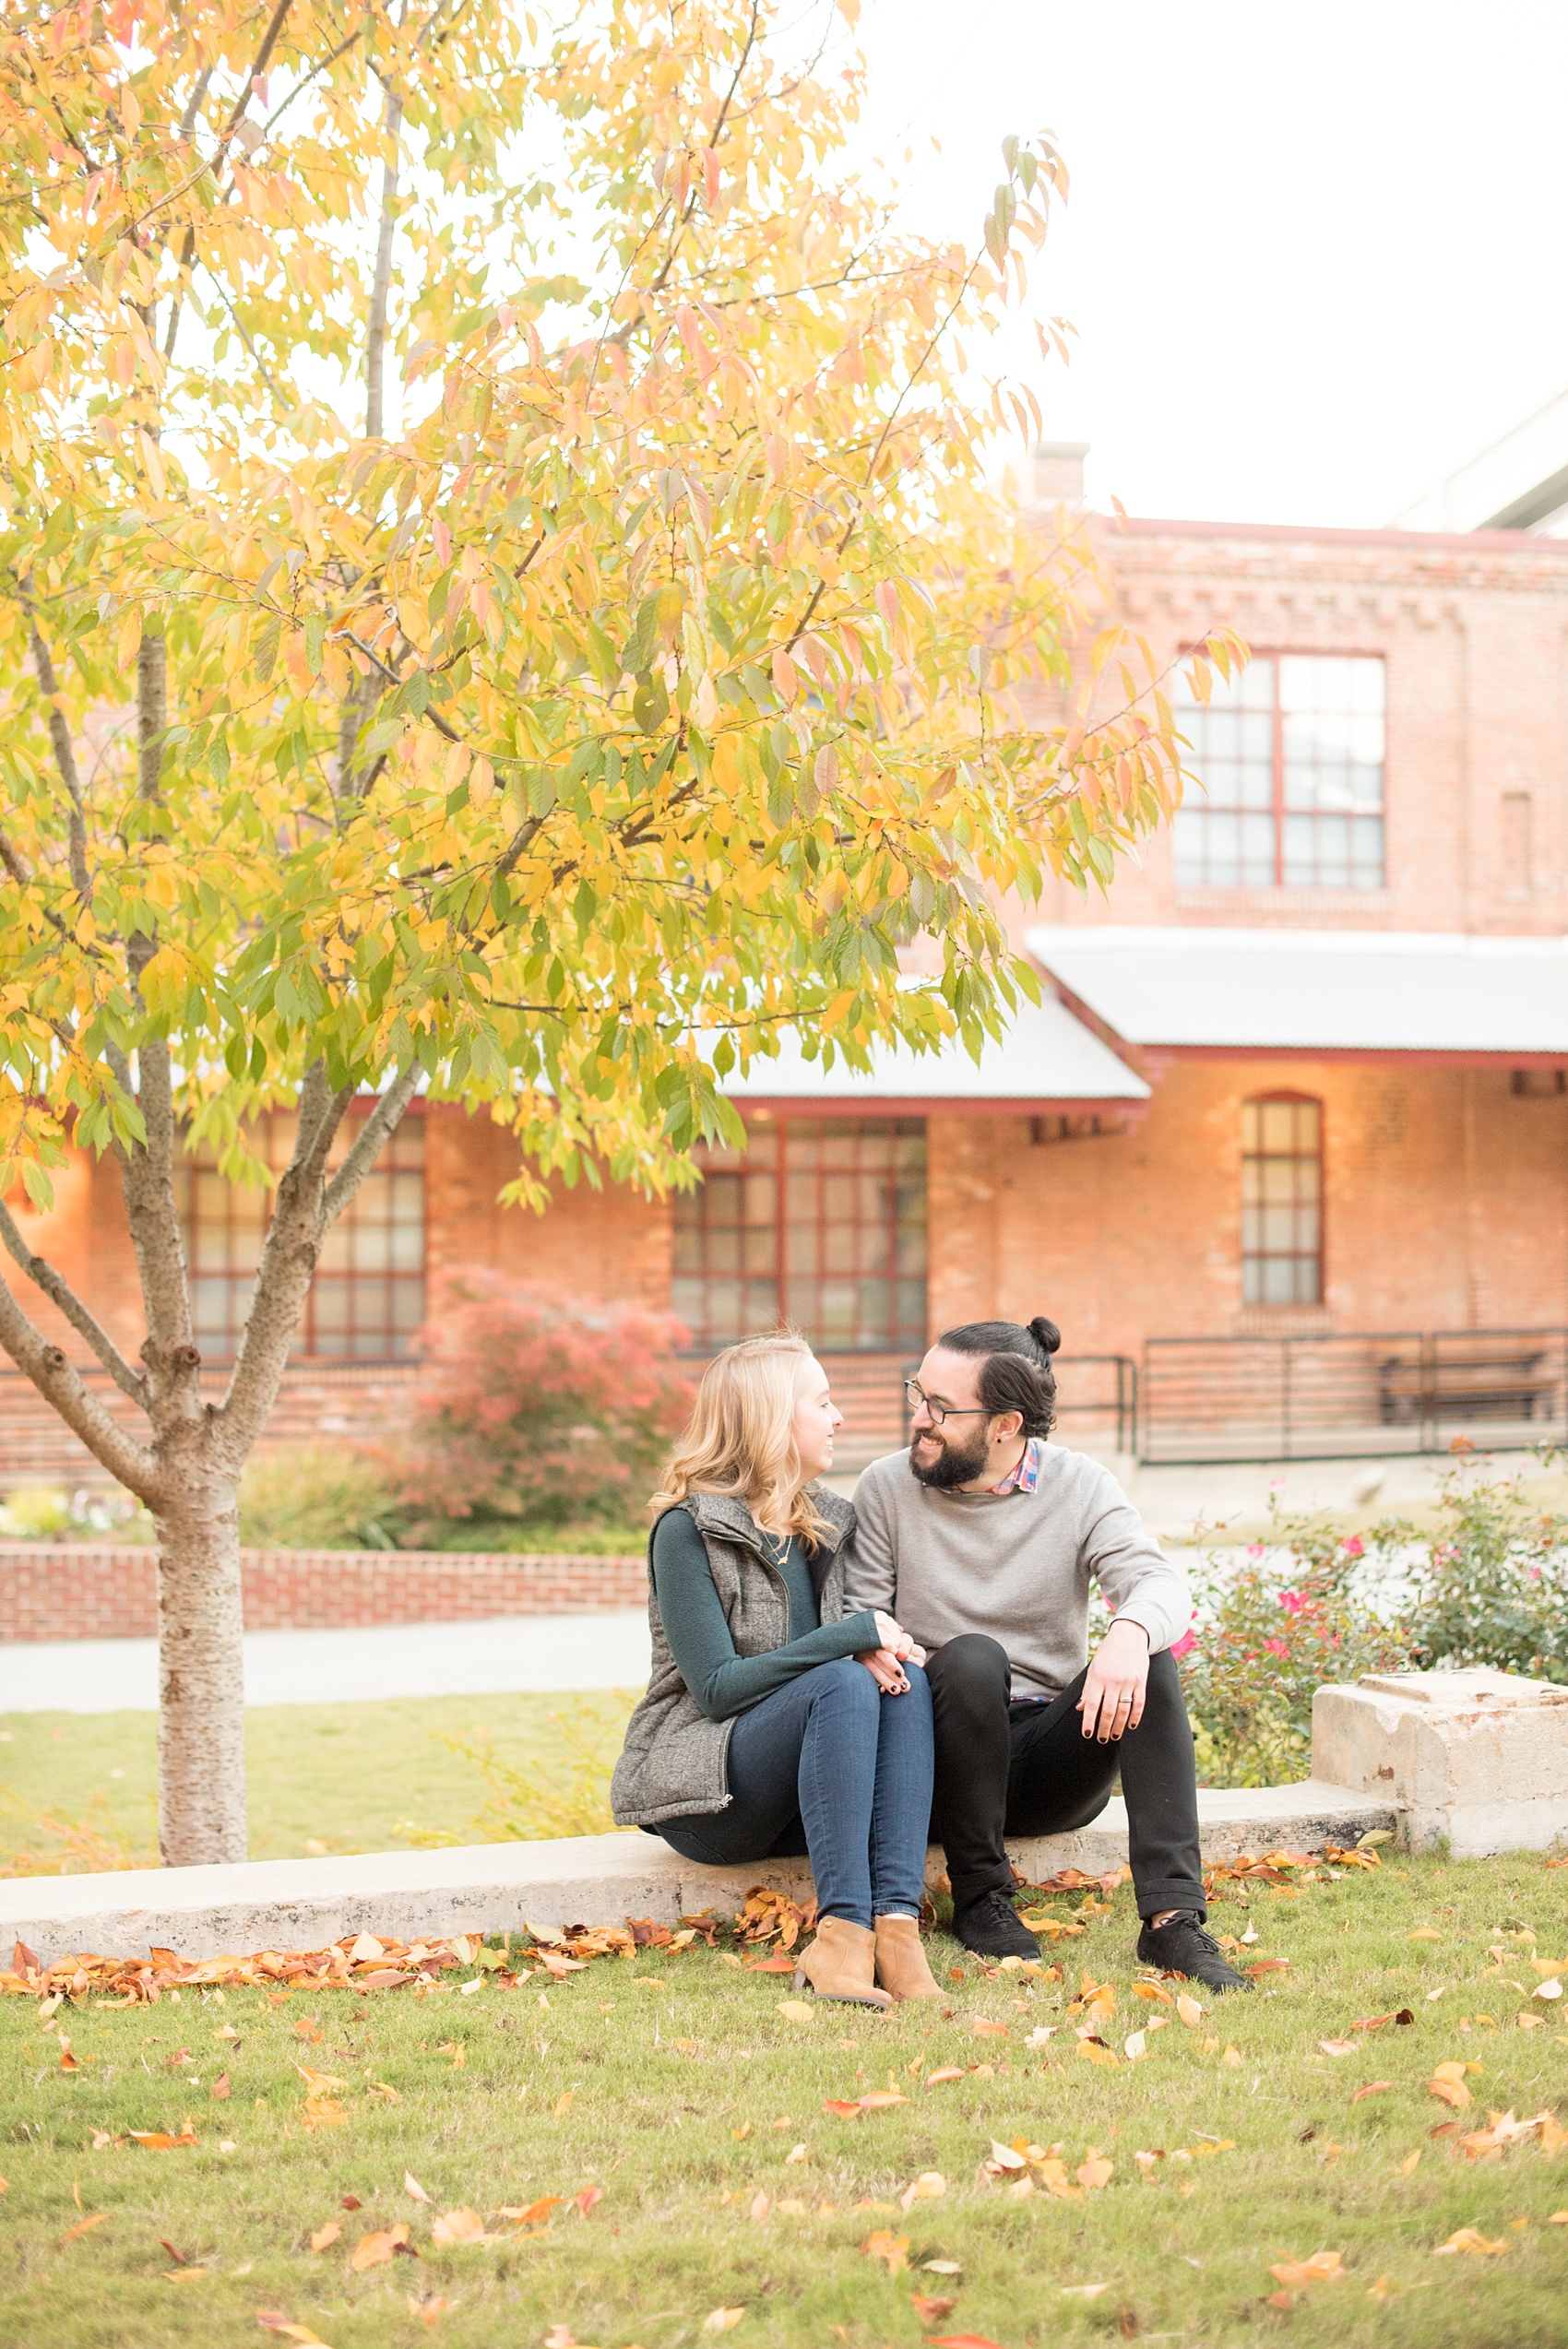 Mikkel Paige Photography photos of a Durham engagement session at American Tobacco Campus with fall leaves.